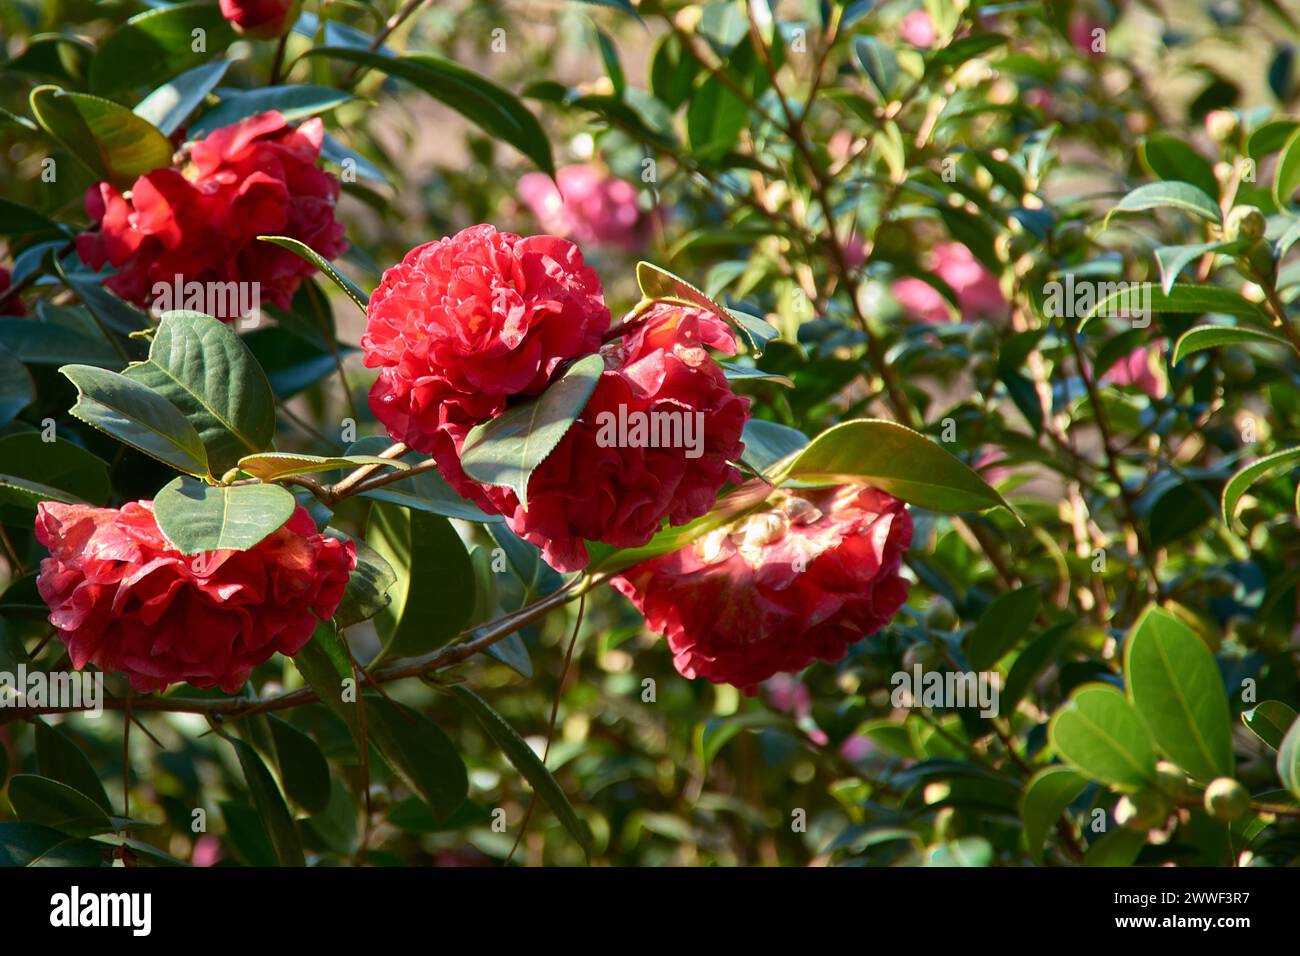 Blooming camellia bush with red flowers and thick leaves in spring in the garden of the Areeiro Phytopathological Station in Pontevedra, Spain Stock Photo